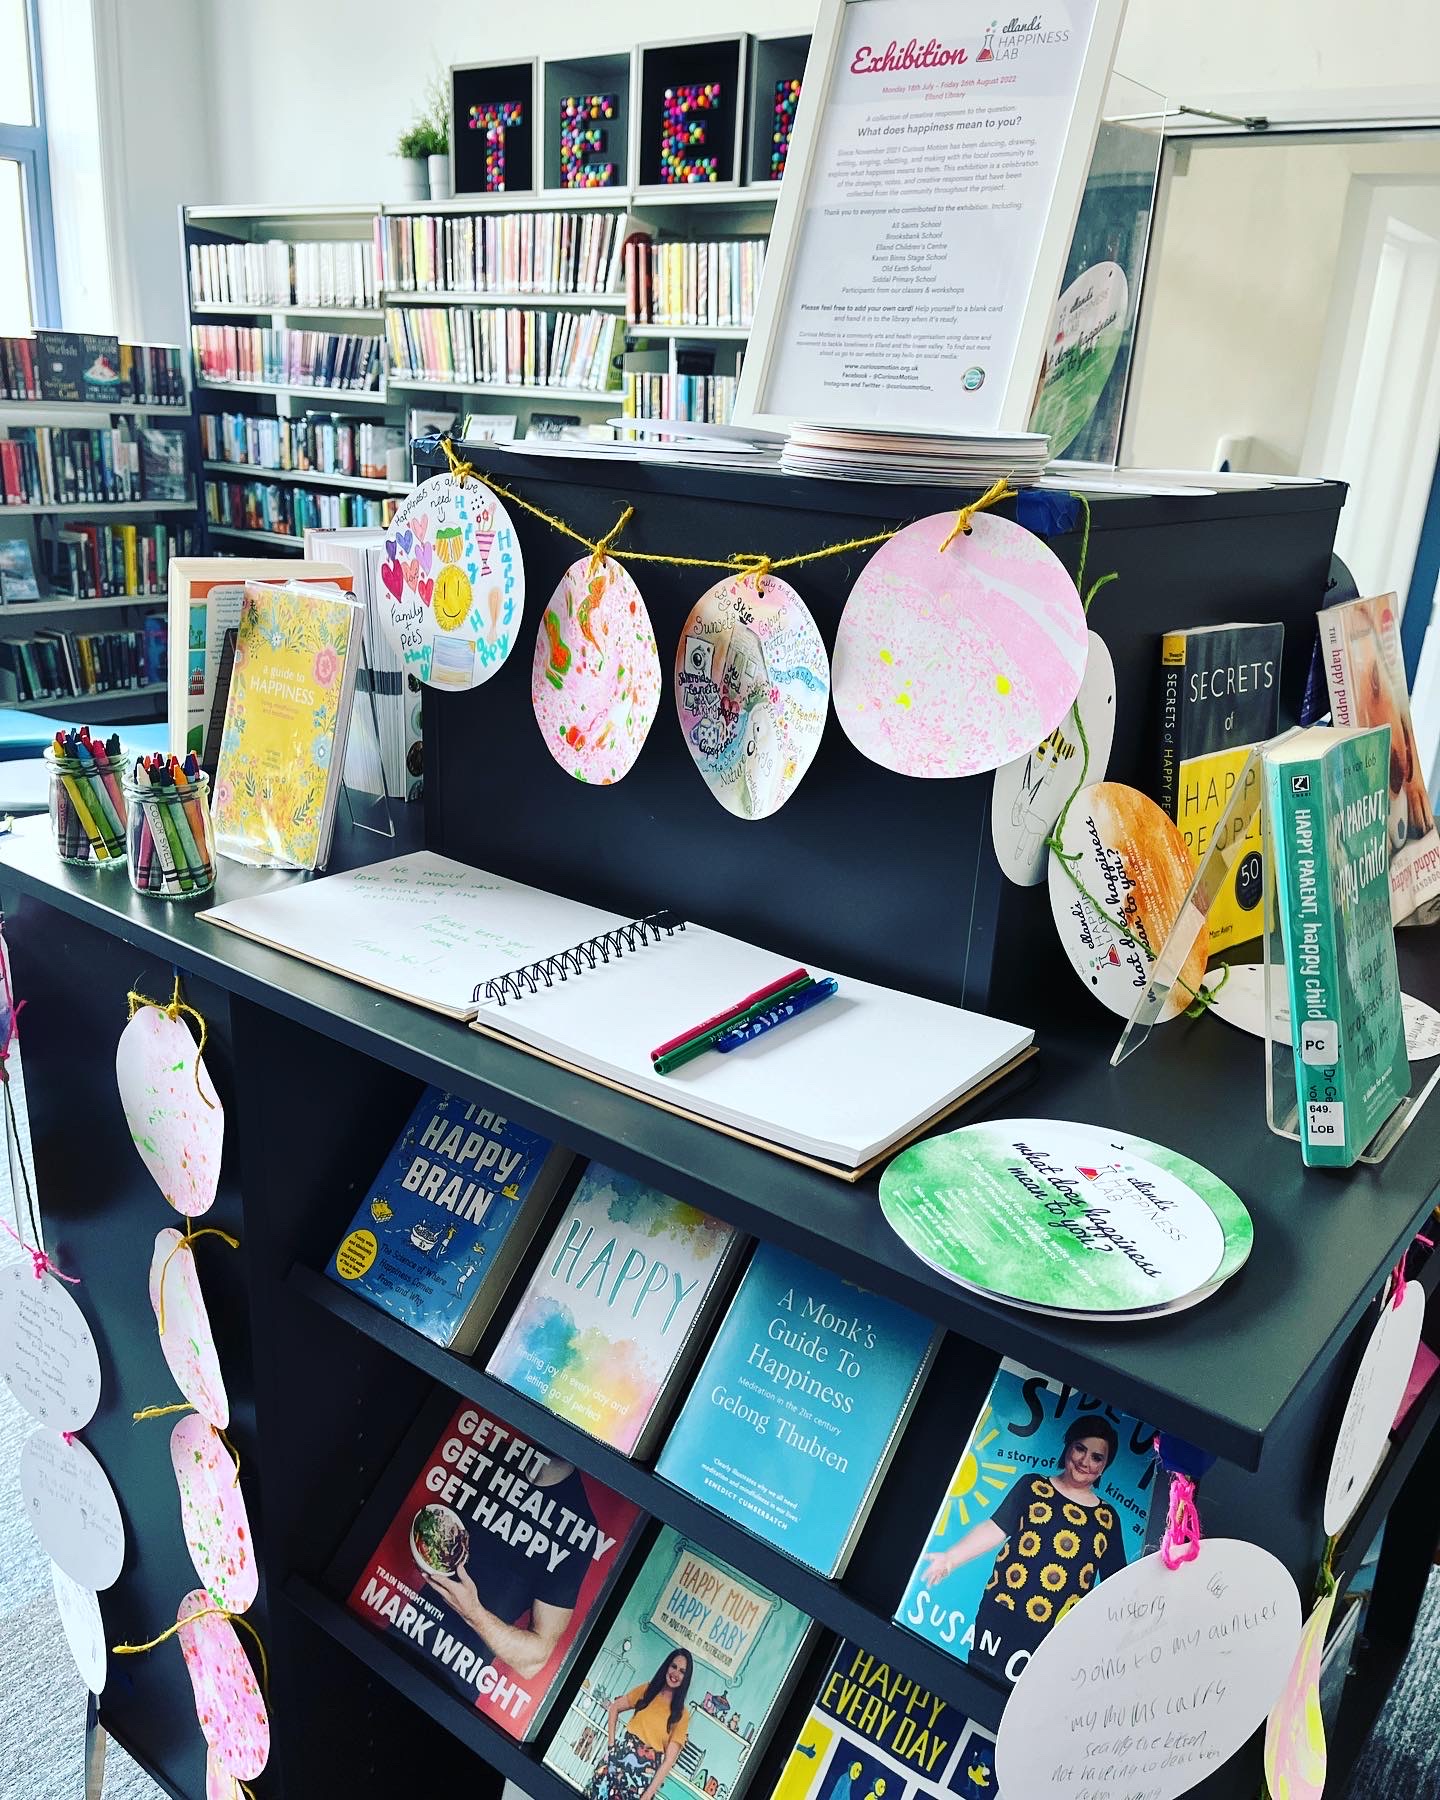 Colourful circular cards surround the exhibition sign and books on happiness